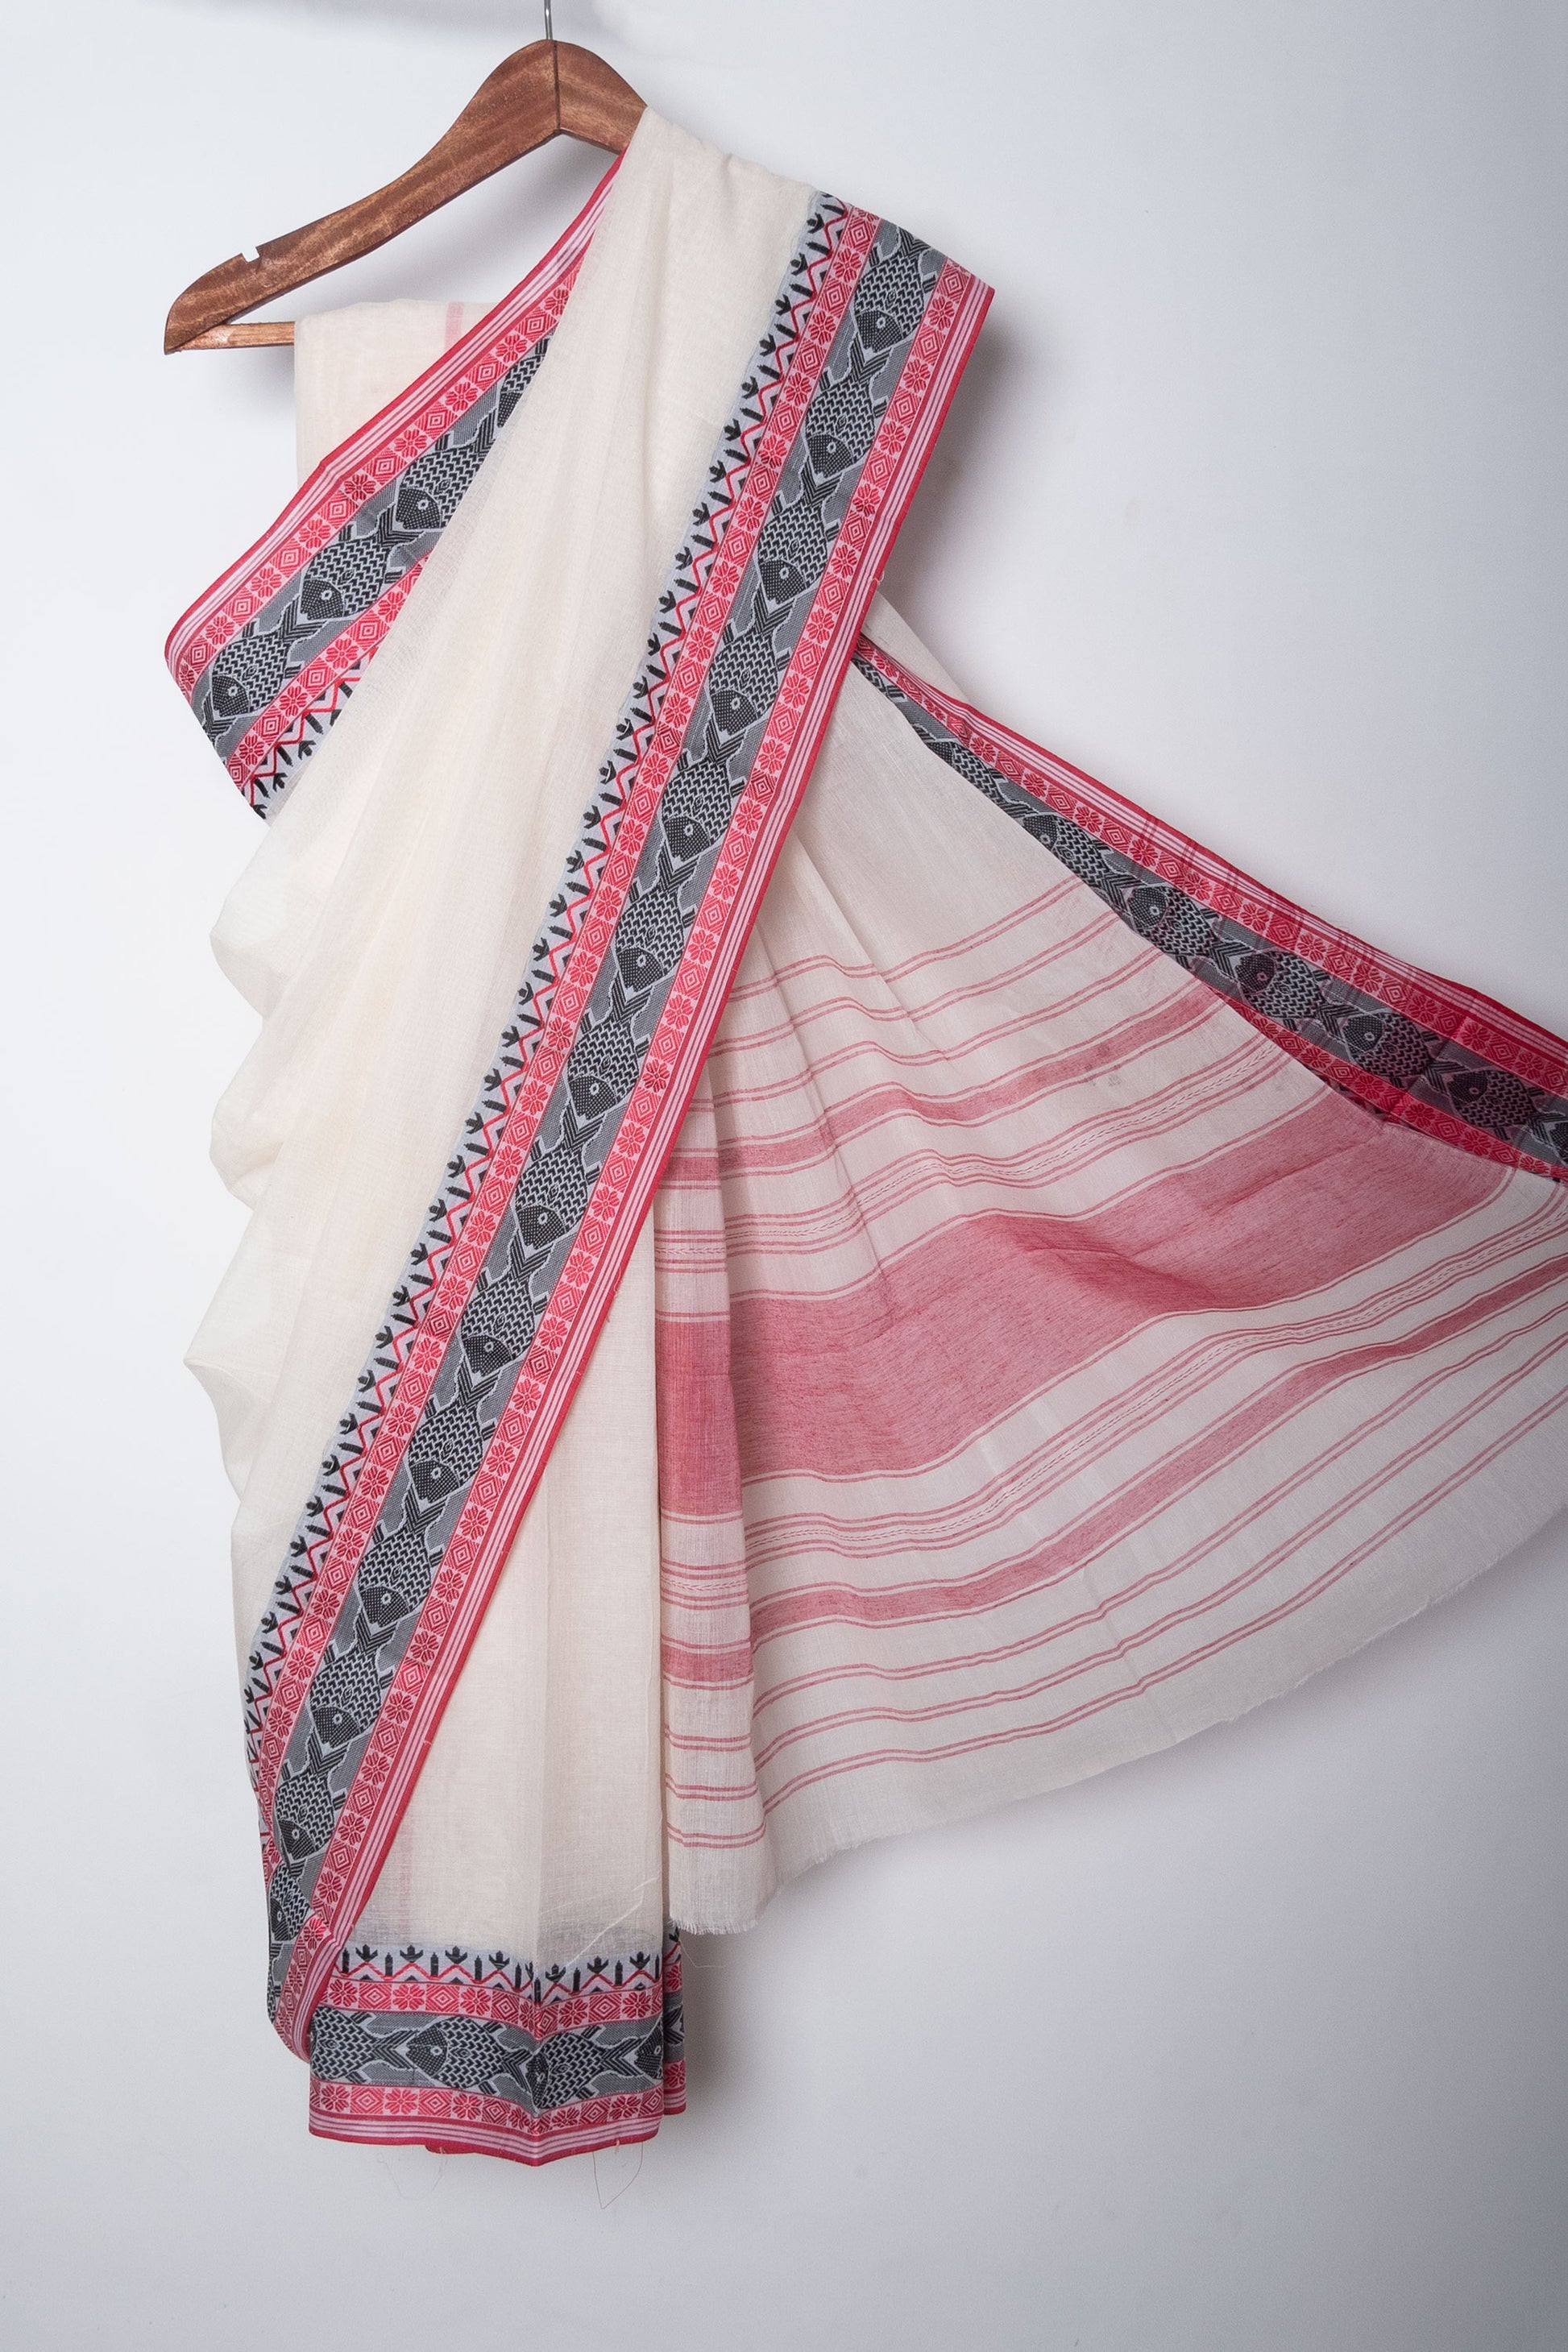 Off White Dhaniakhali Cotton Handloom Saree with Woven Fish Borders